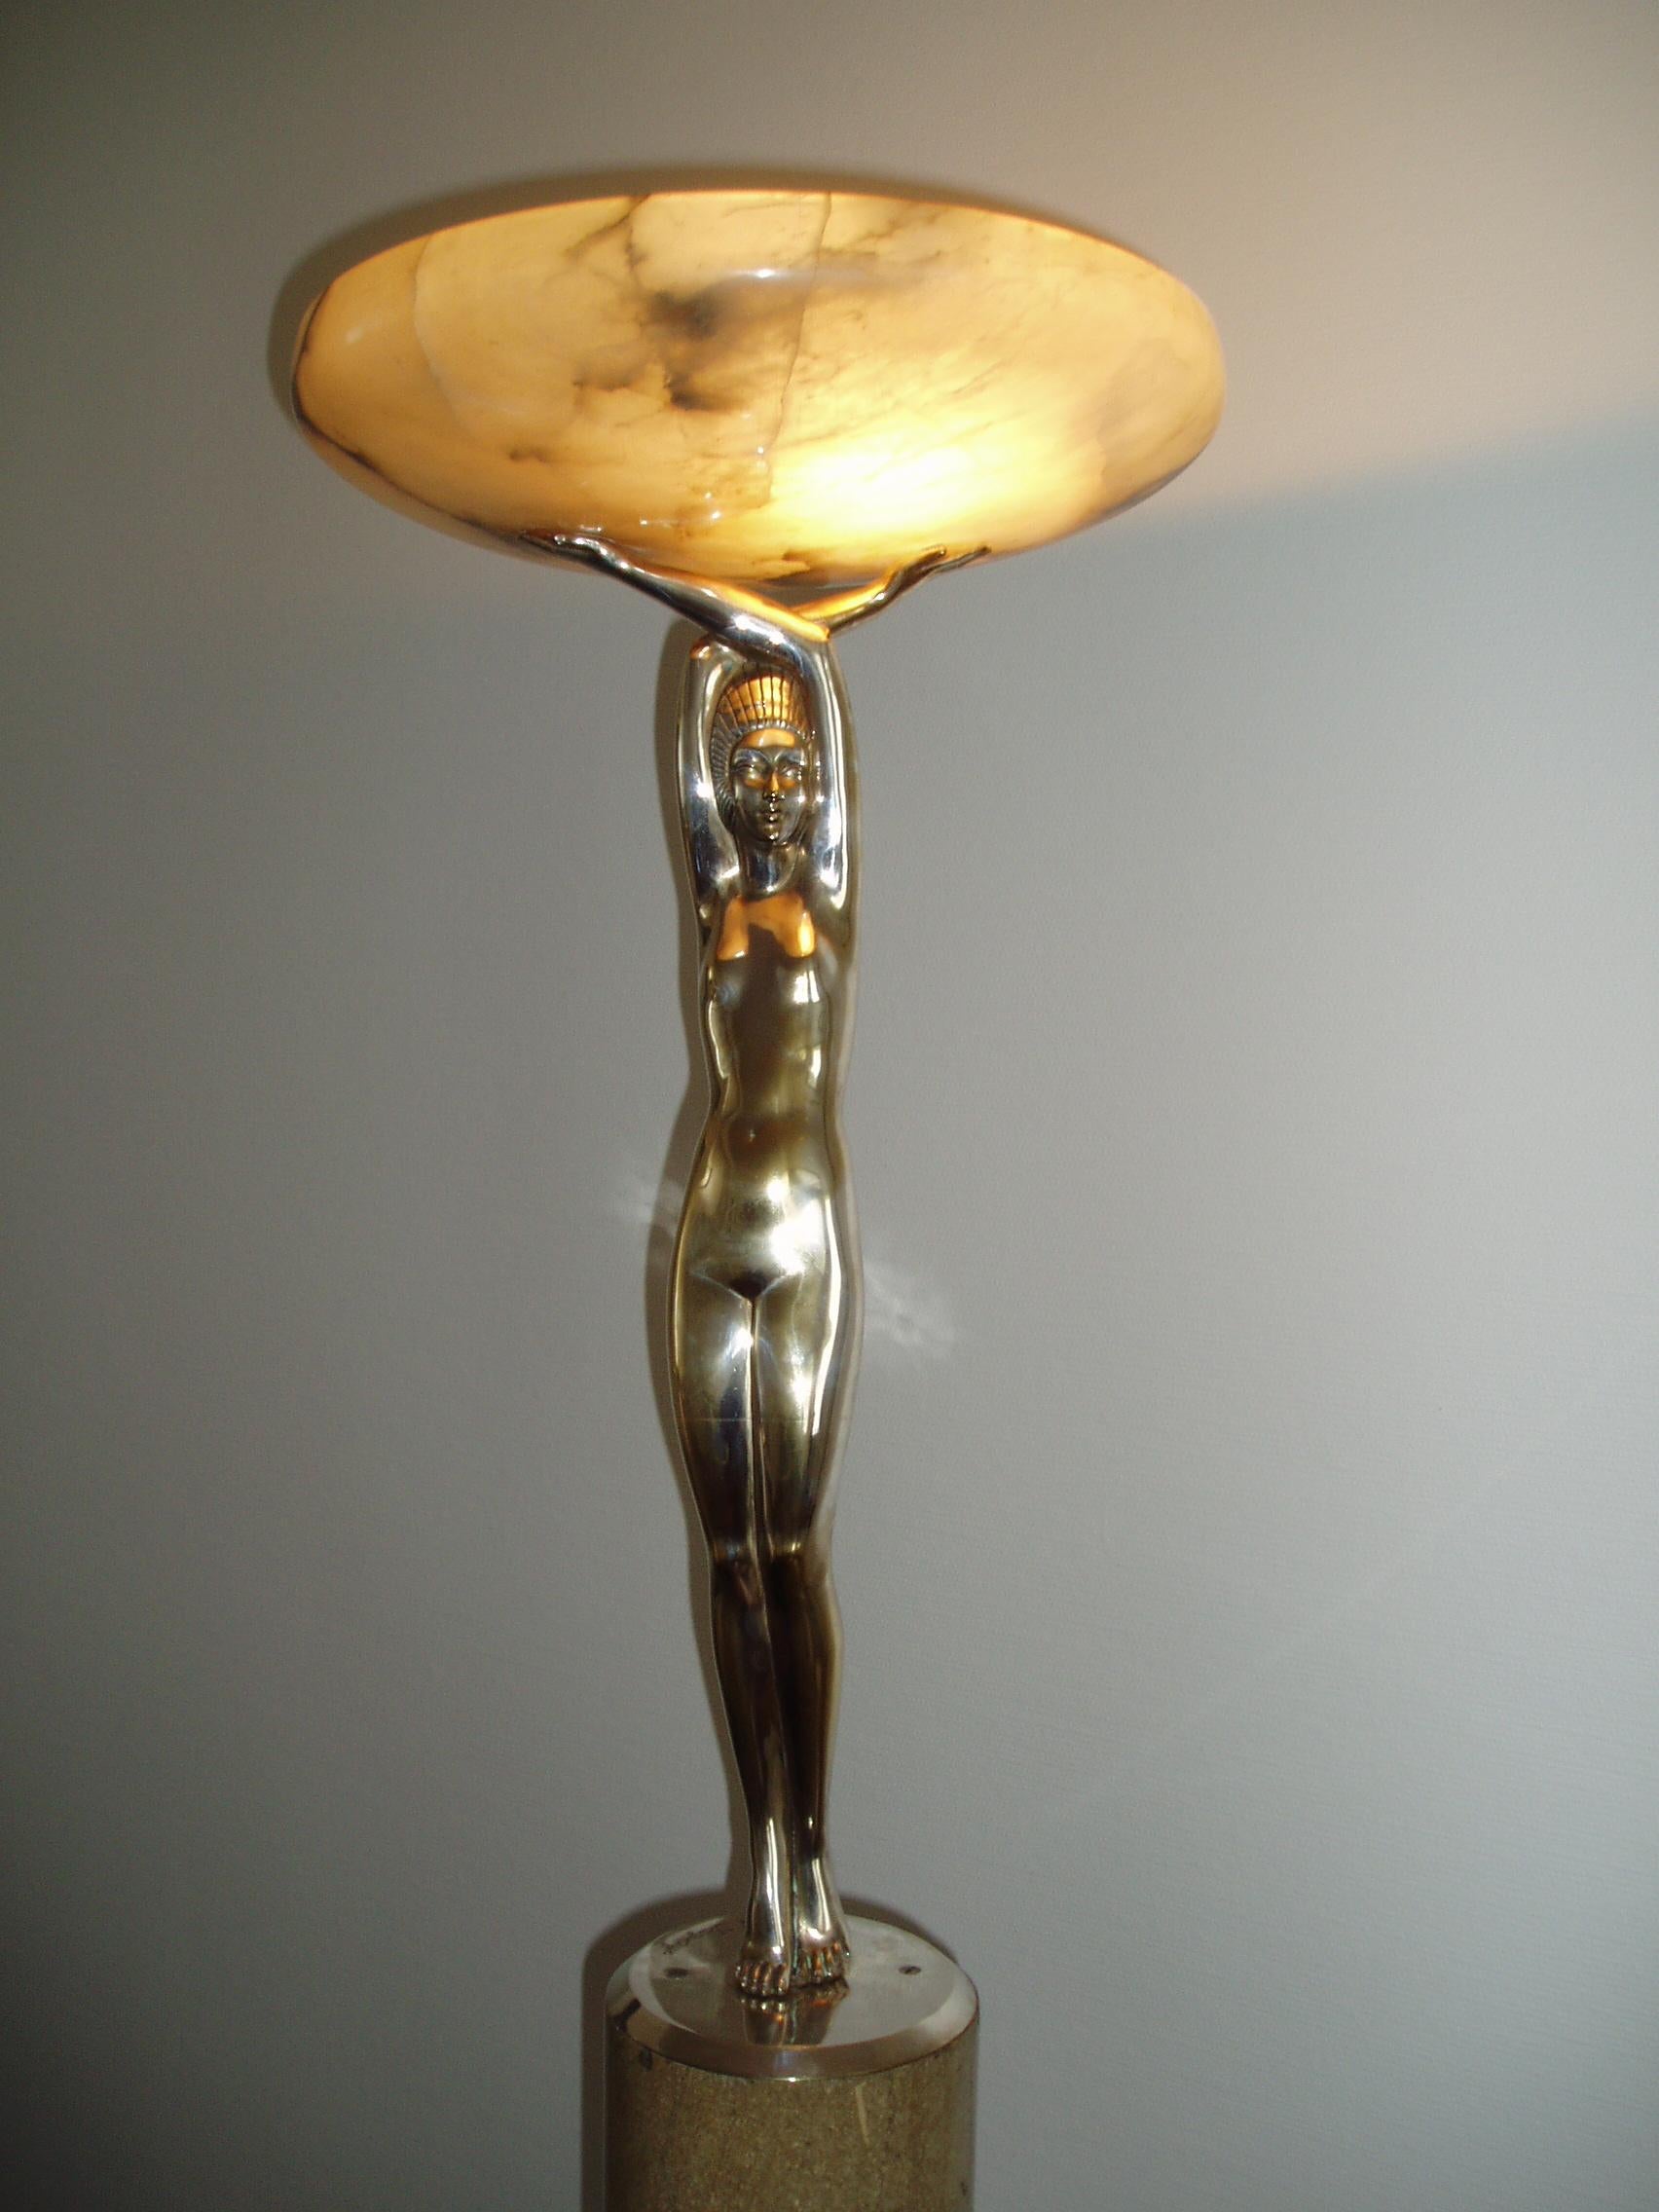 Silver-plated signed Art Déco bronze sculpure by Pierre le Faguays on a high stone base. 1920s. The figure carries an illuminated alabaster bowl on its hands. High heavy beige stone base.
Original alabaster bowl from the 1920s.
Pierre le Faguays